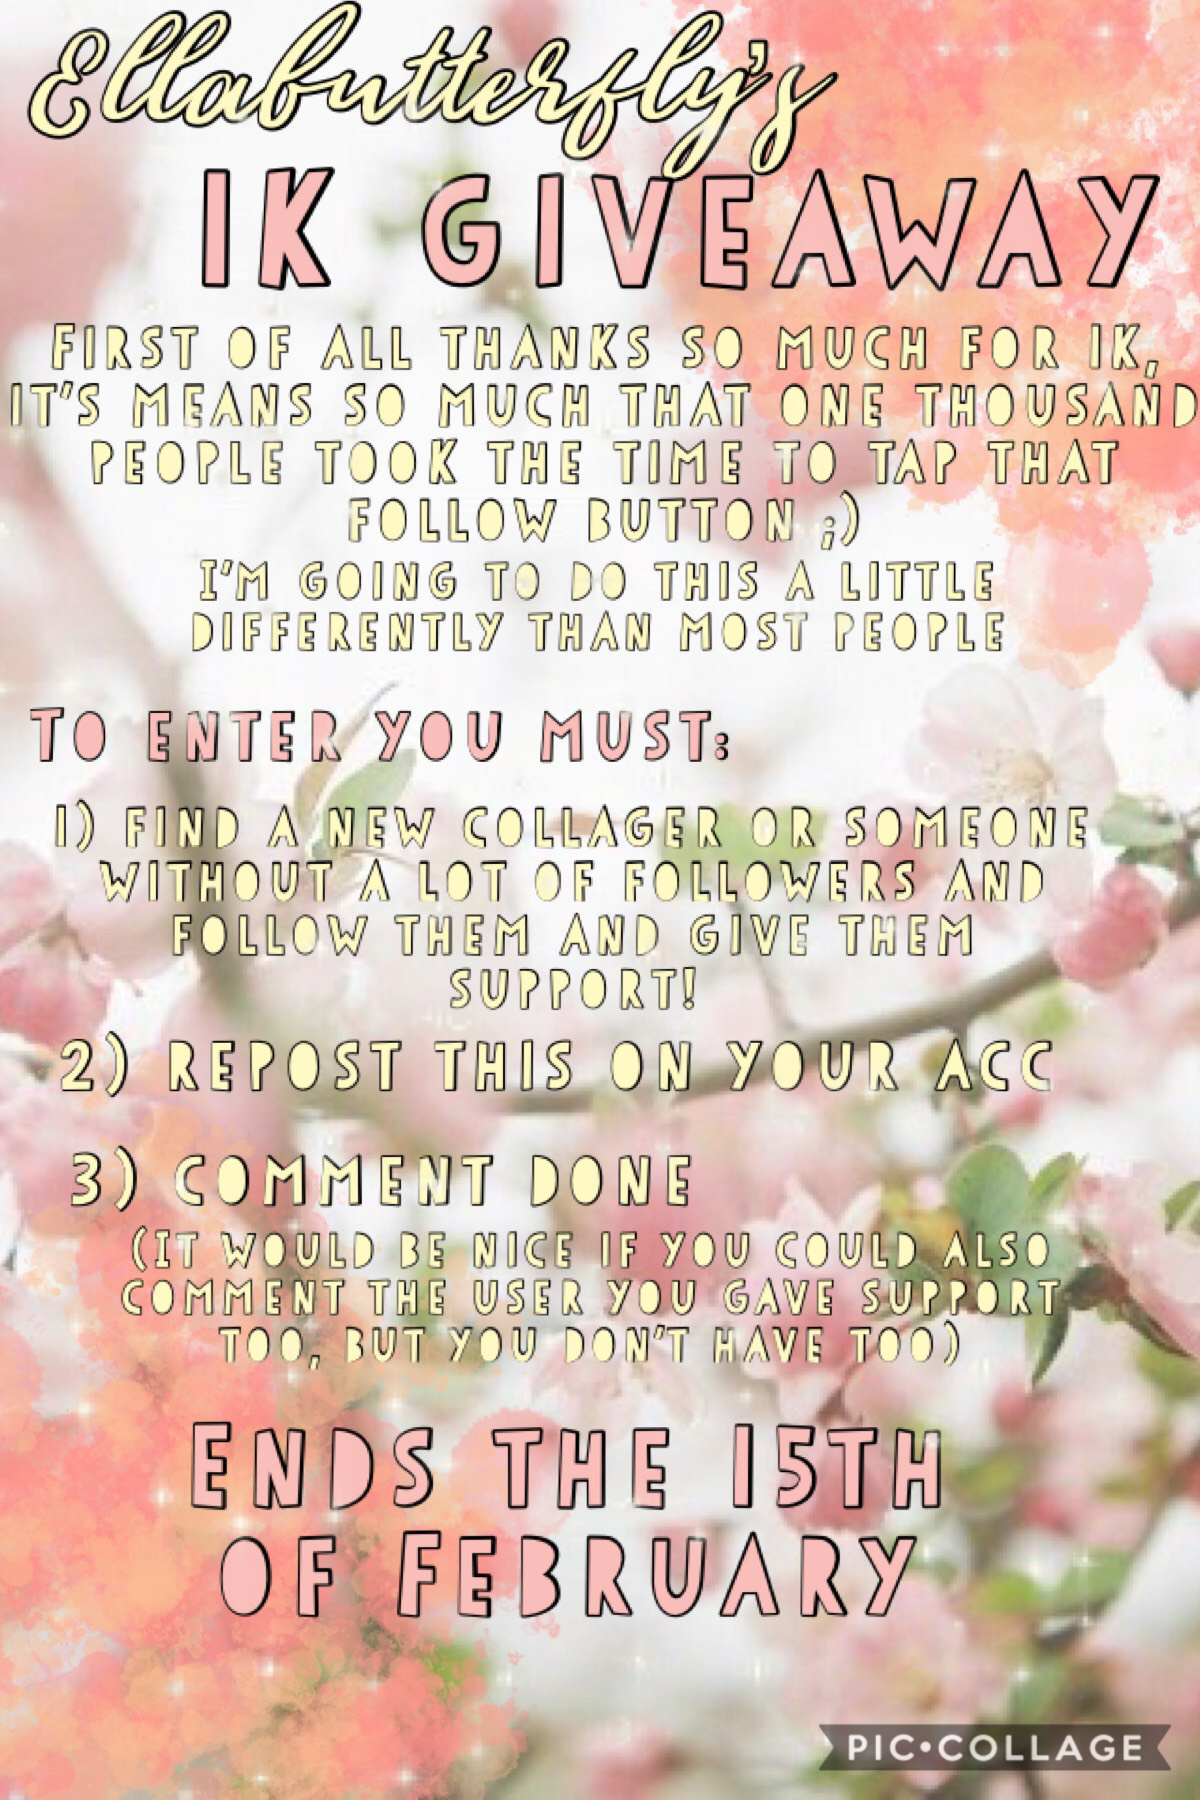 I thought I’d try something a bit different where you like others collages instead of mine. That way we can all learn to be a bit kinder.
💖Please enter and spread the word💖